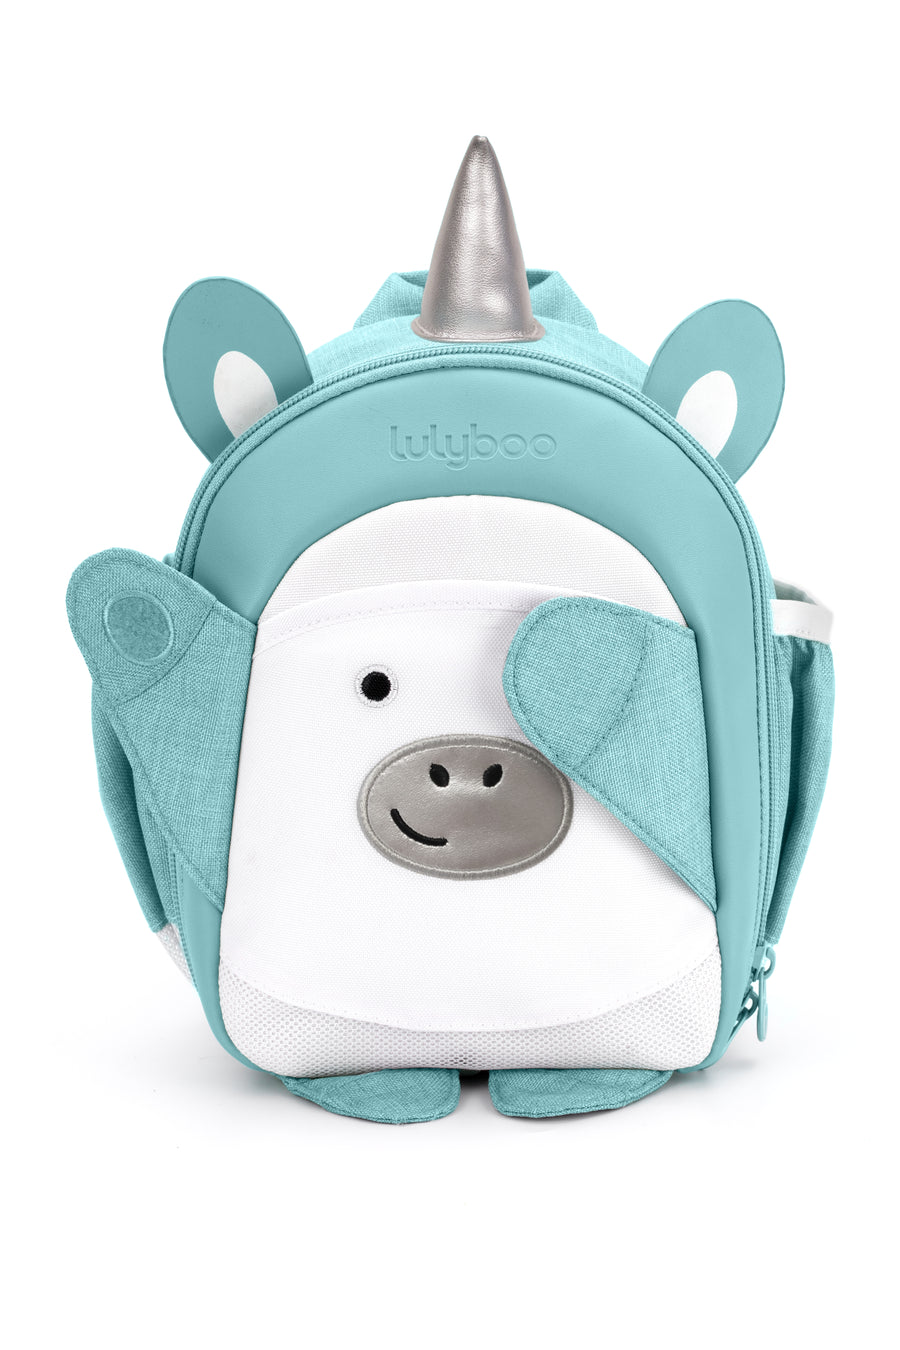 Boo Toddler Backpack